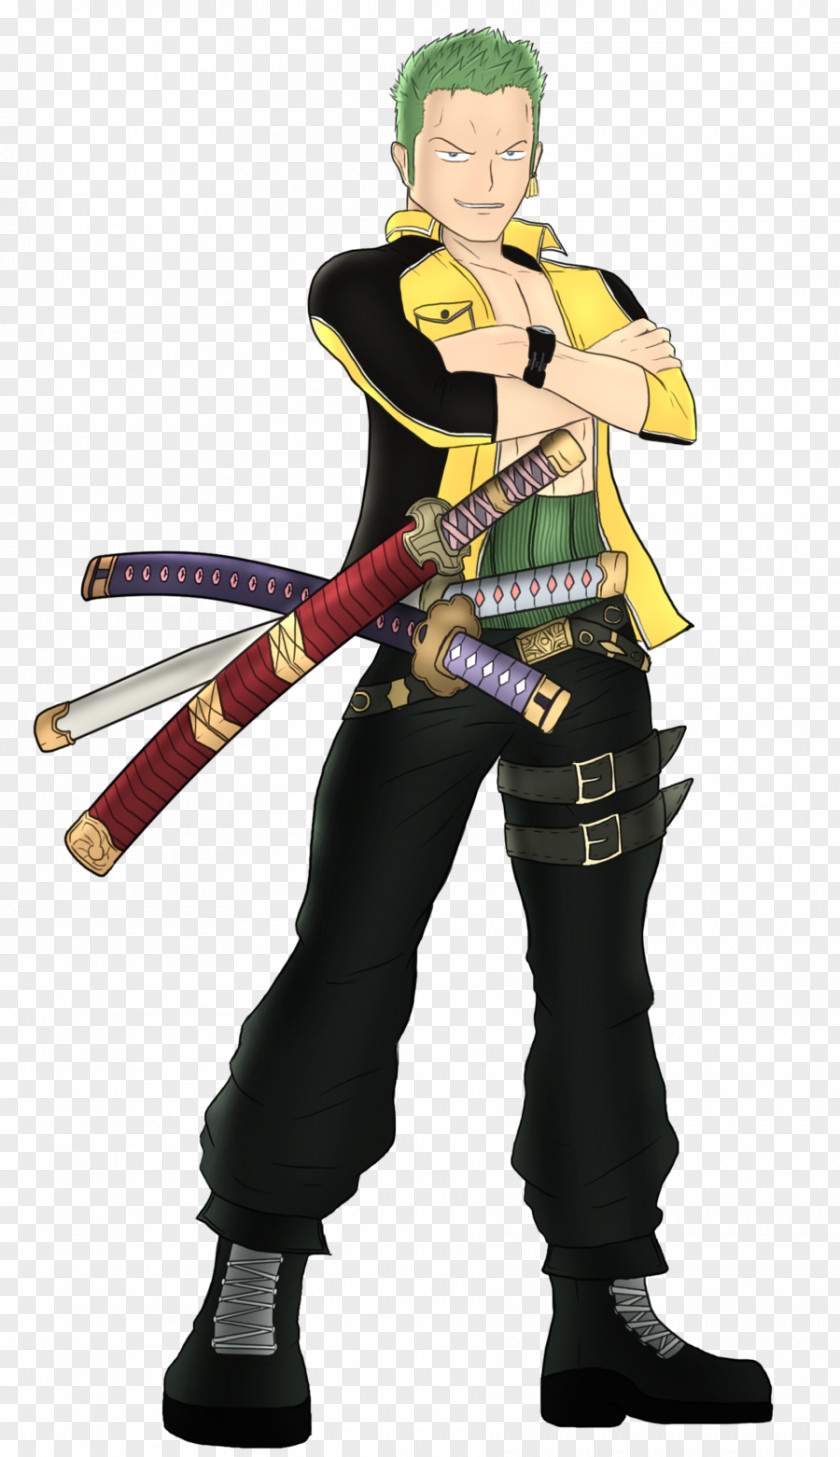 One Piece Zoro Piracy Character Costume History PNG